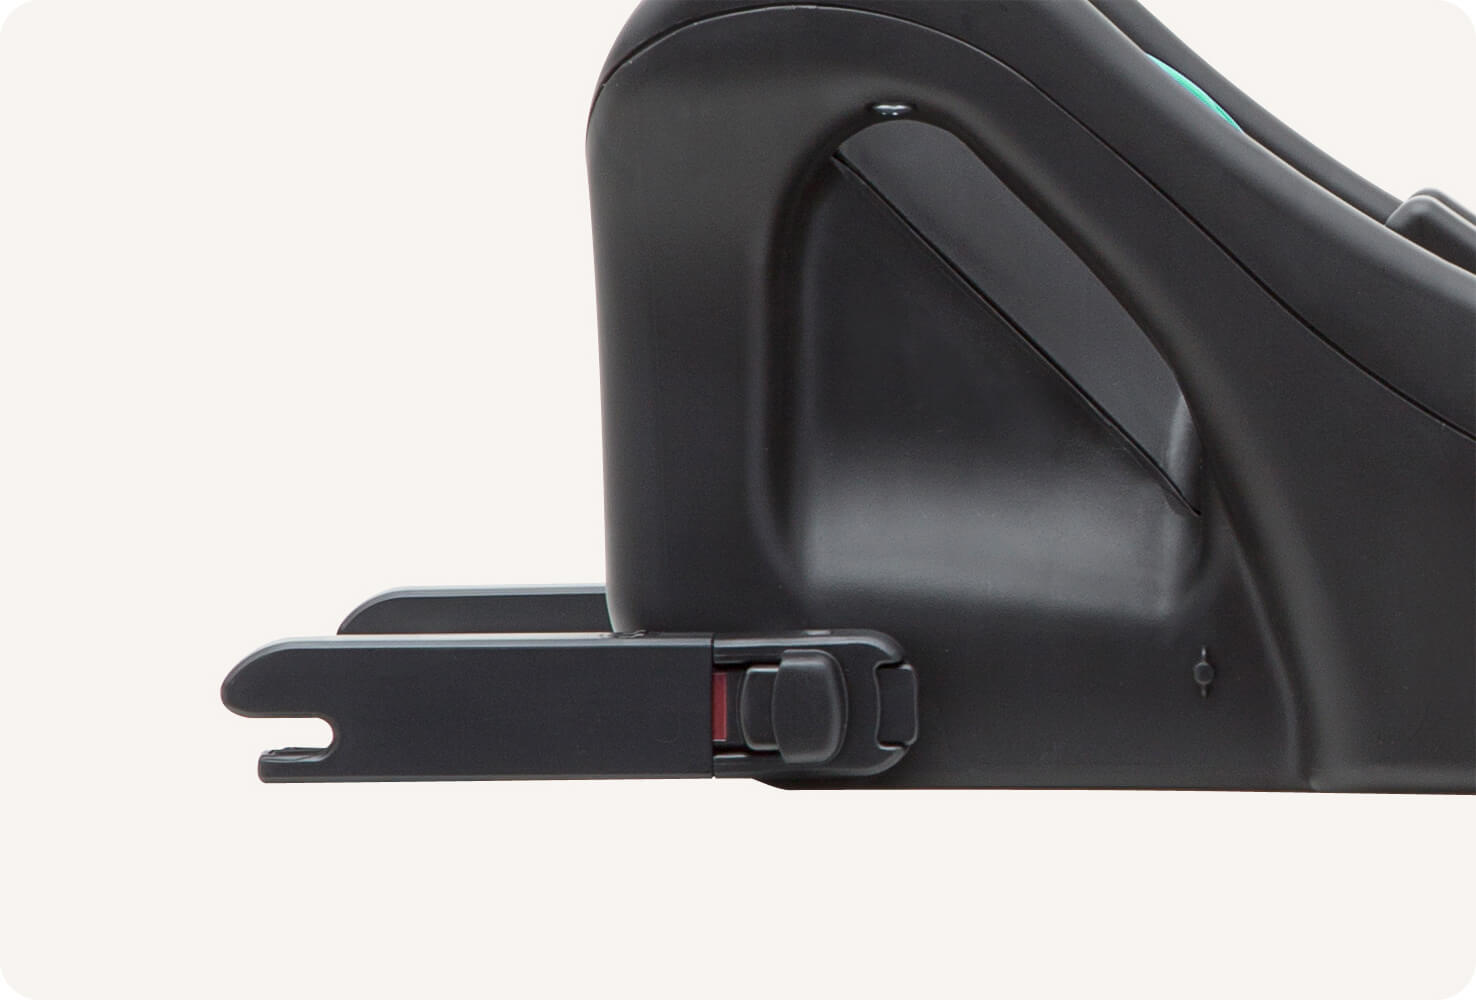 Close-up view of the ISOFIX connector on the Joie i-Base 2 car seat base.